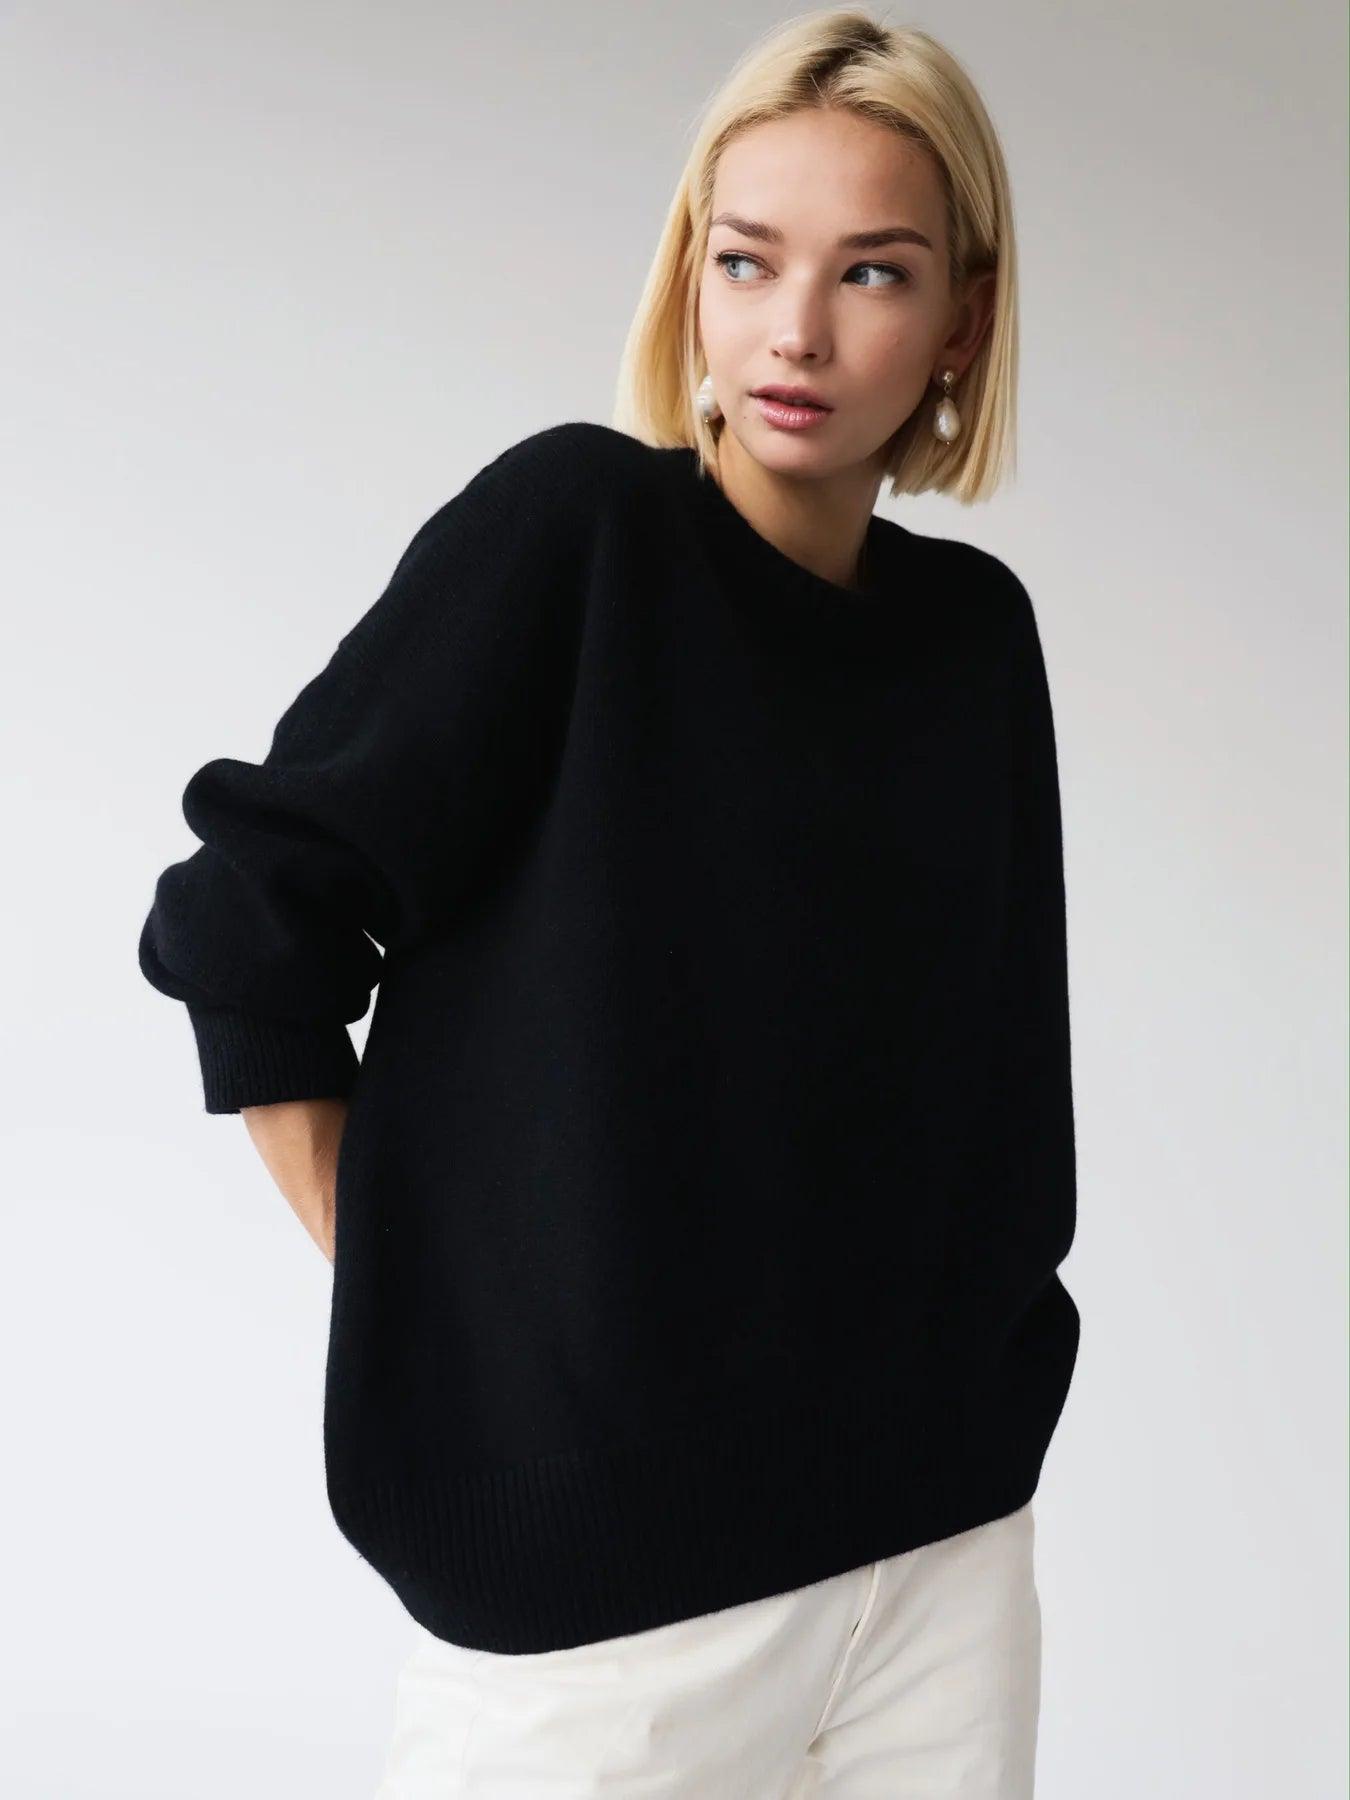 Classic Comfort Long Sleeve Pullover - itsshirty